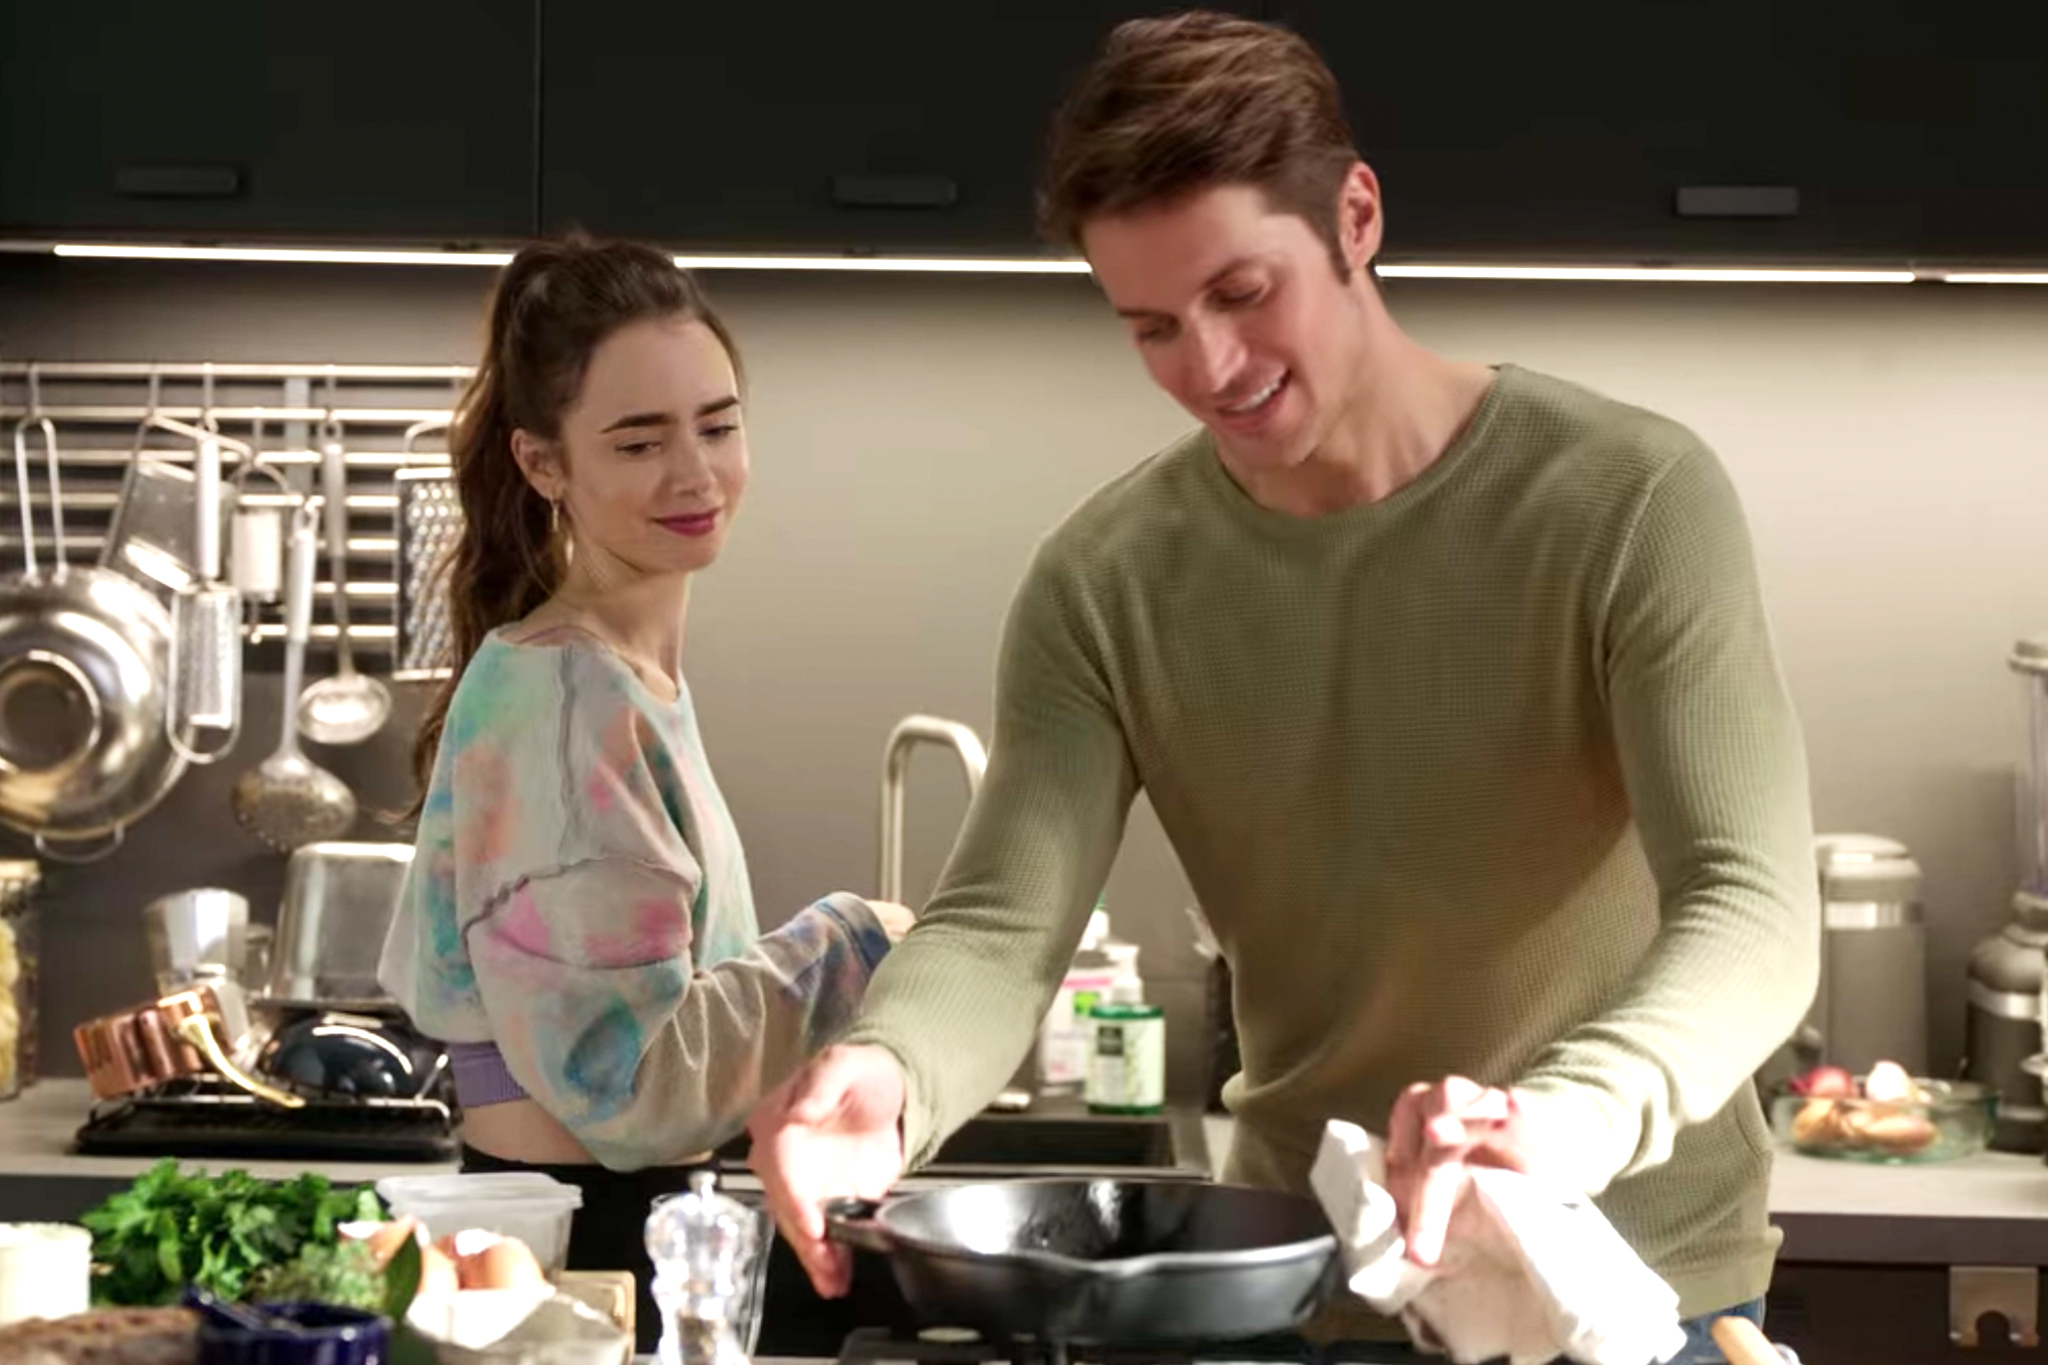 Who is Lucas Bravo, the hot chef from 'Emily in Paris'?